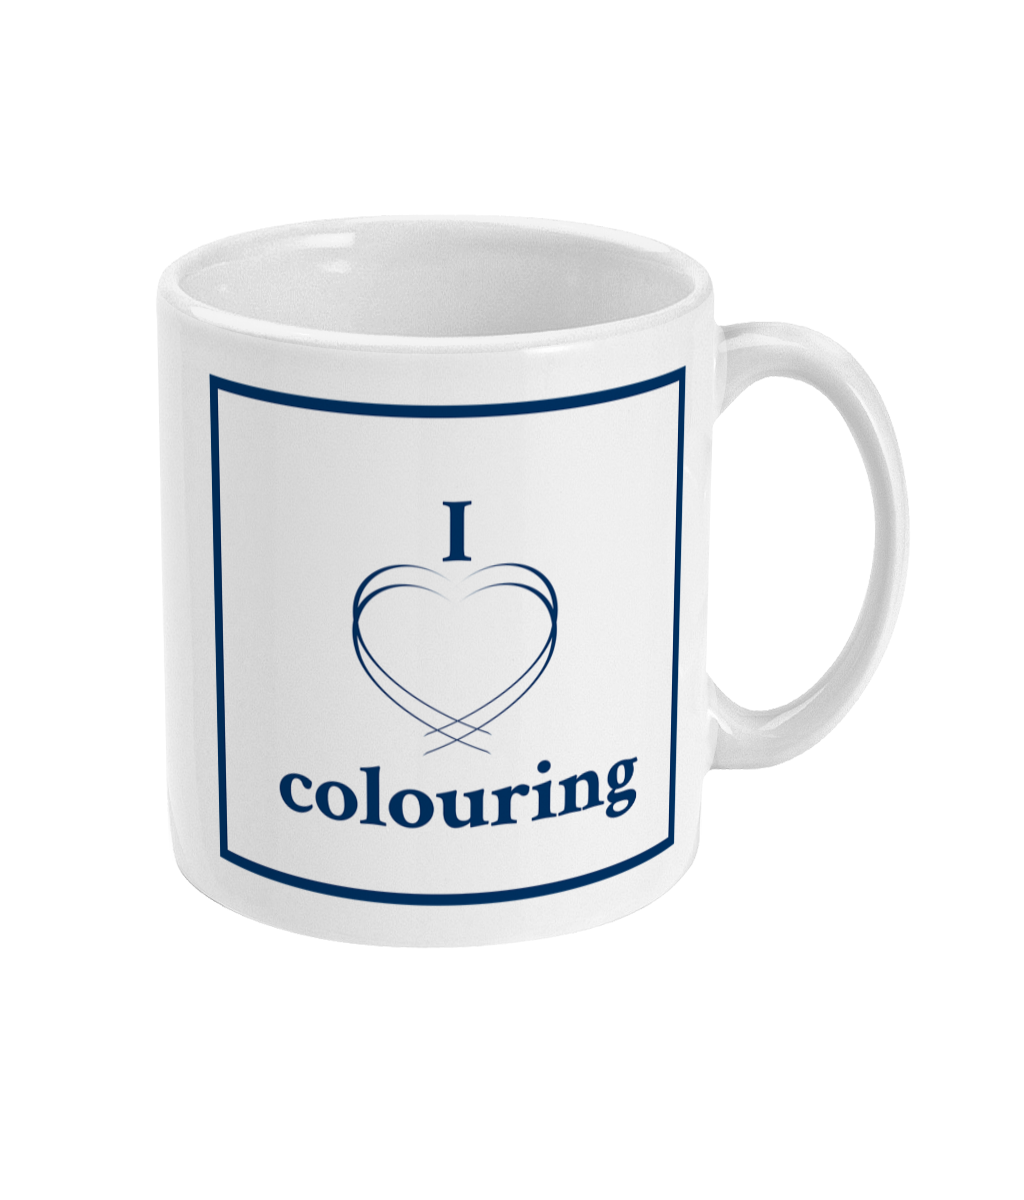 mug with i love colouring printed on it